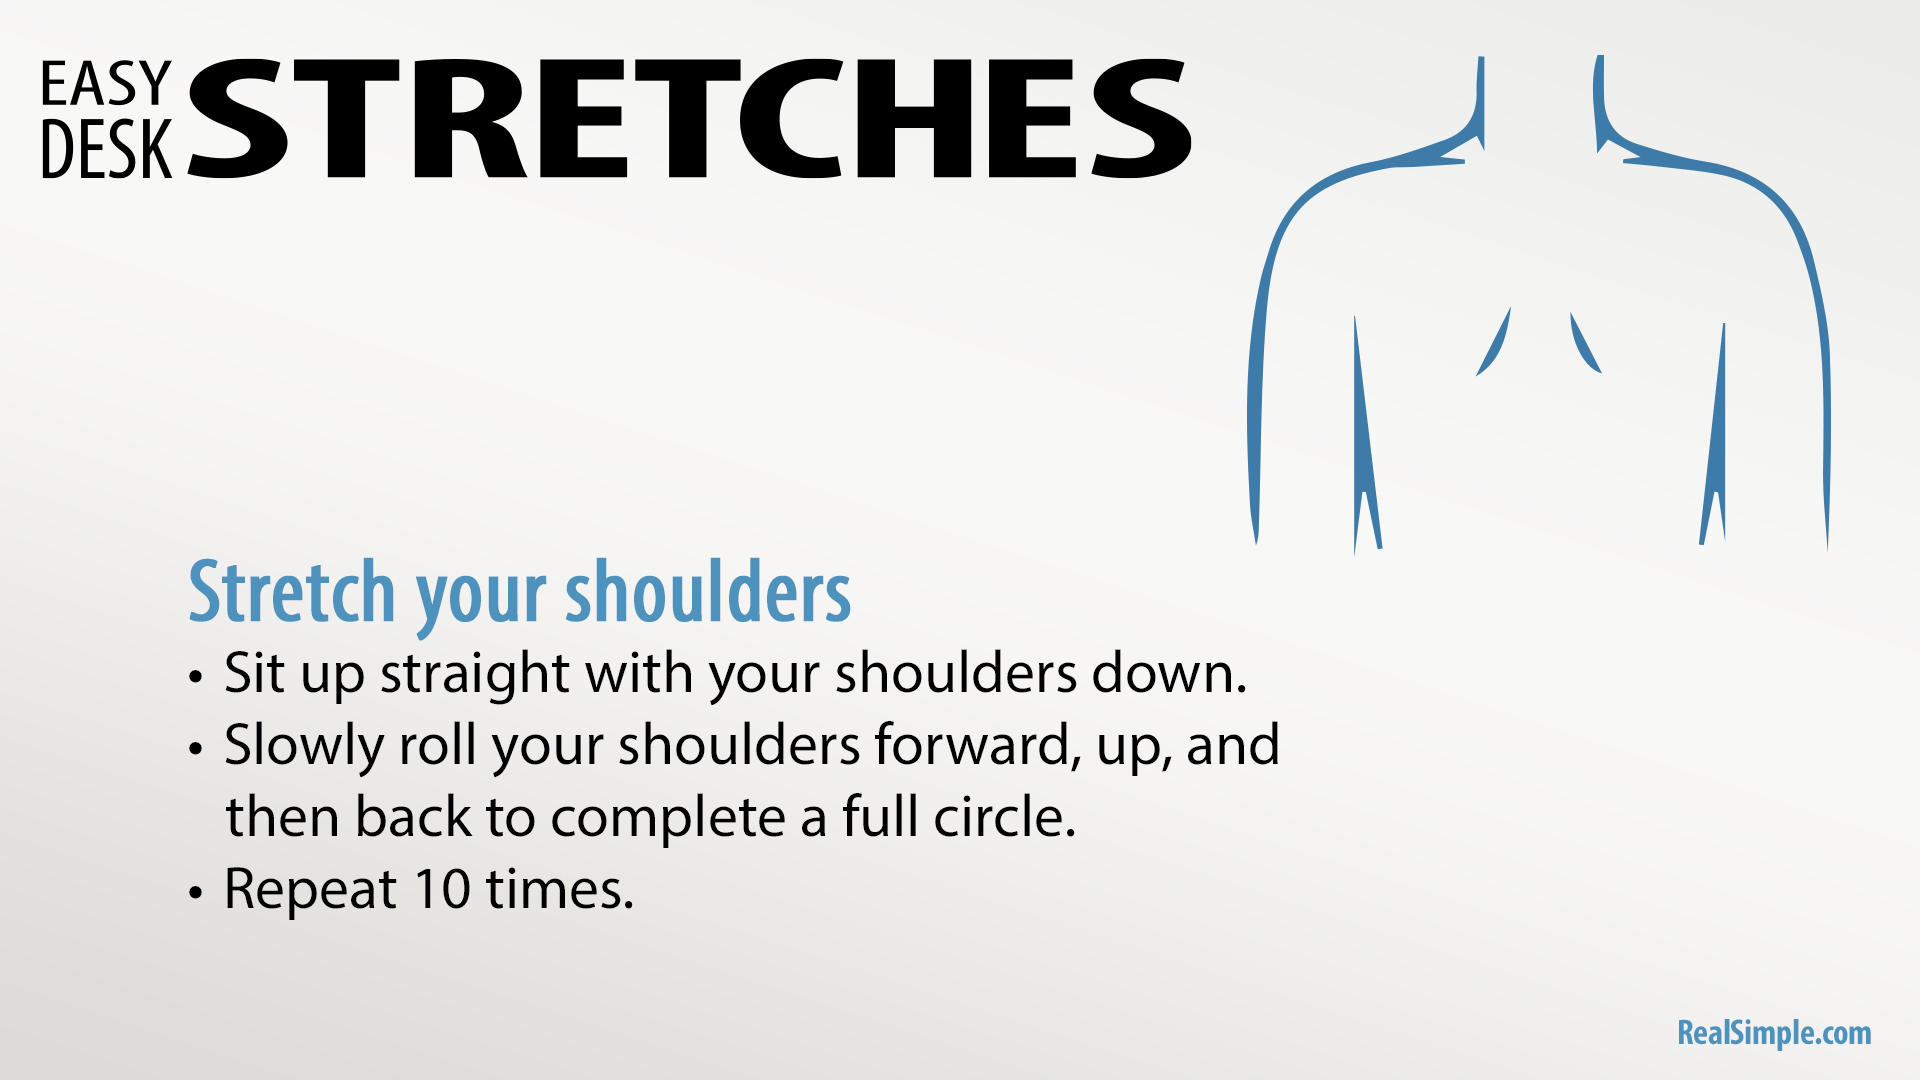 Free Graphic | Easy Desk Stretches | Stretch Your Shoulders